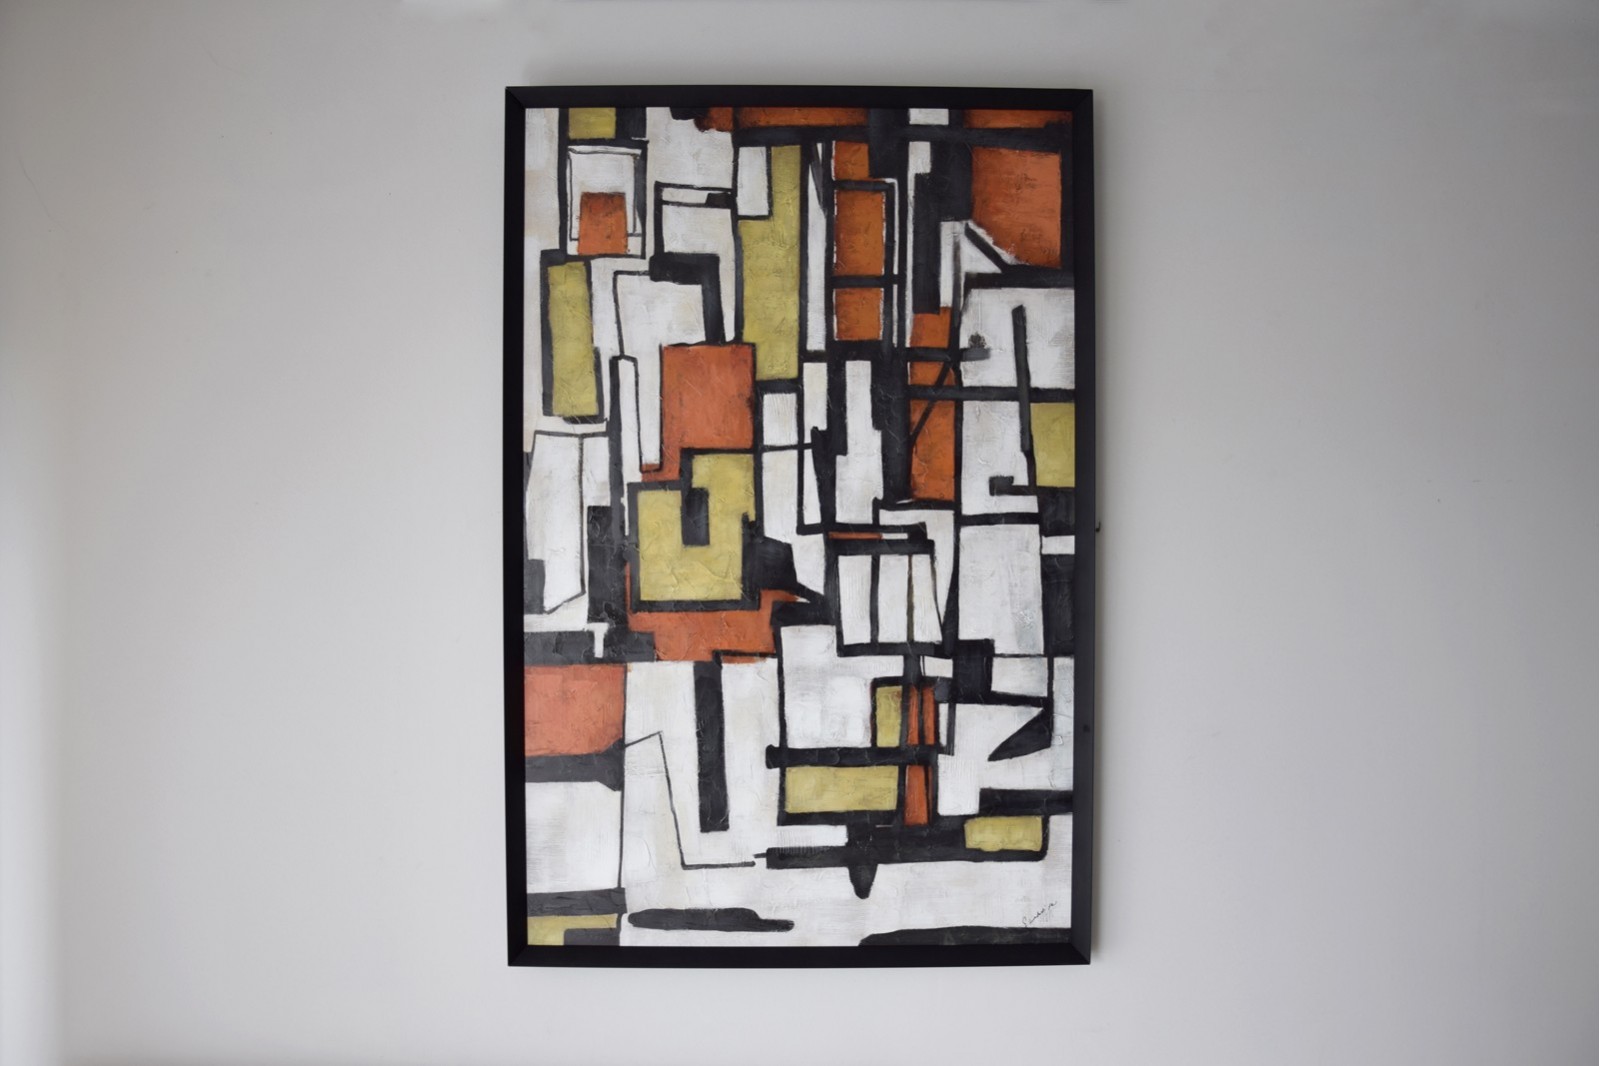 ABSTRACT PAINTING LABYRINTH N2. BLACK FRAME